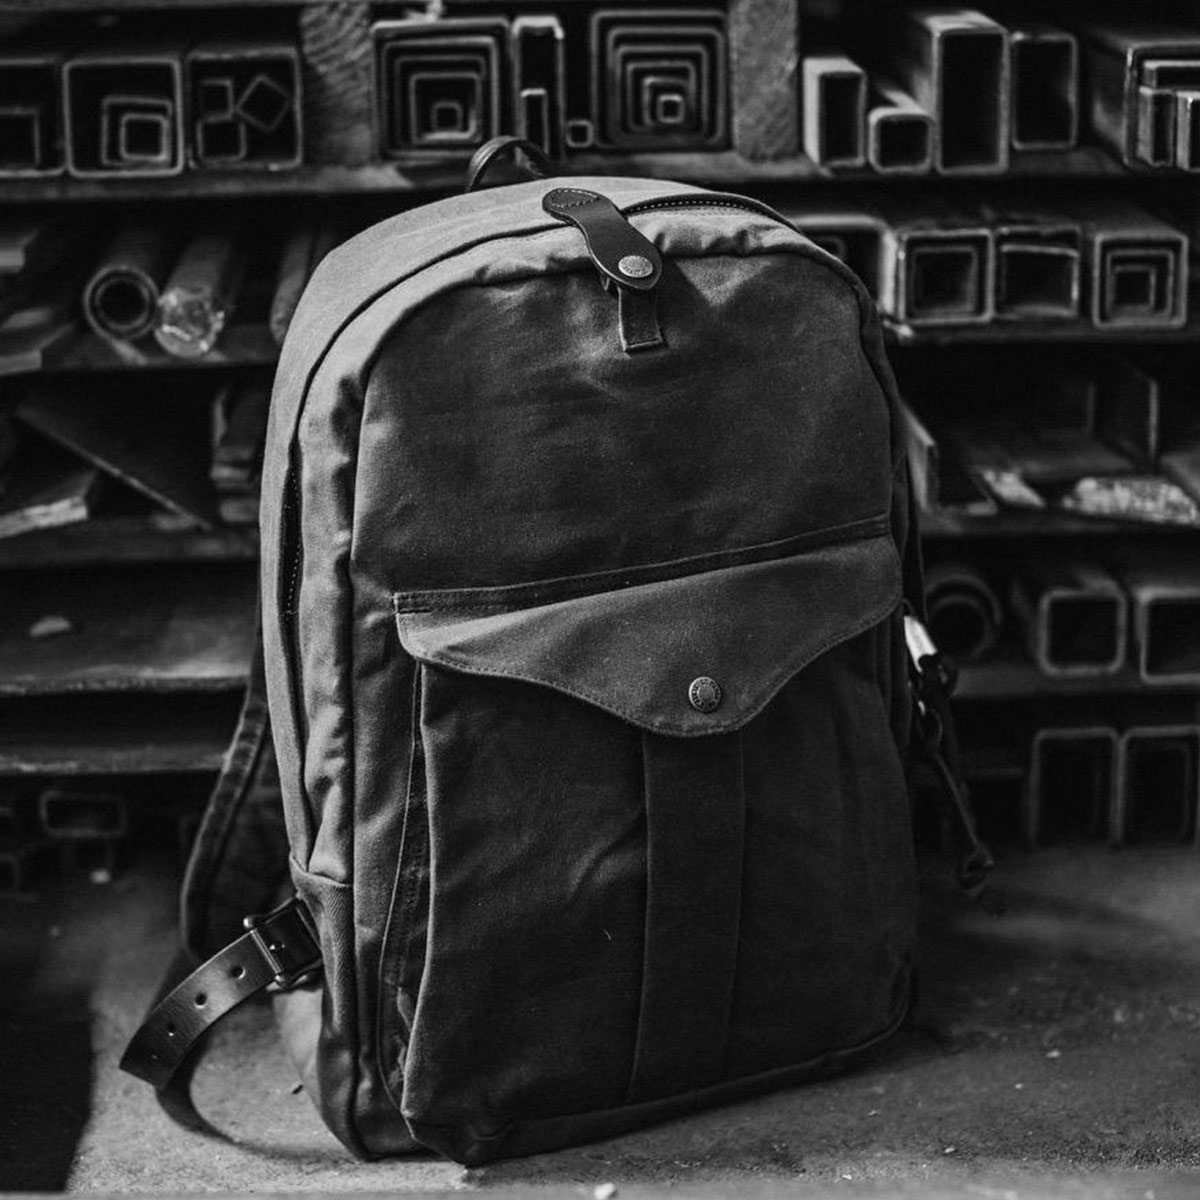 Filson Journeyman Backpack 20231638 Cinder, a perfect backpack for use in the field and city